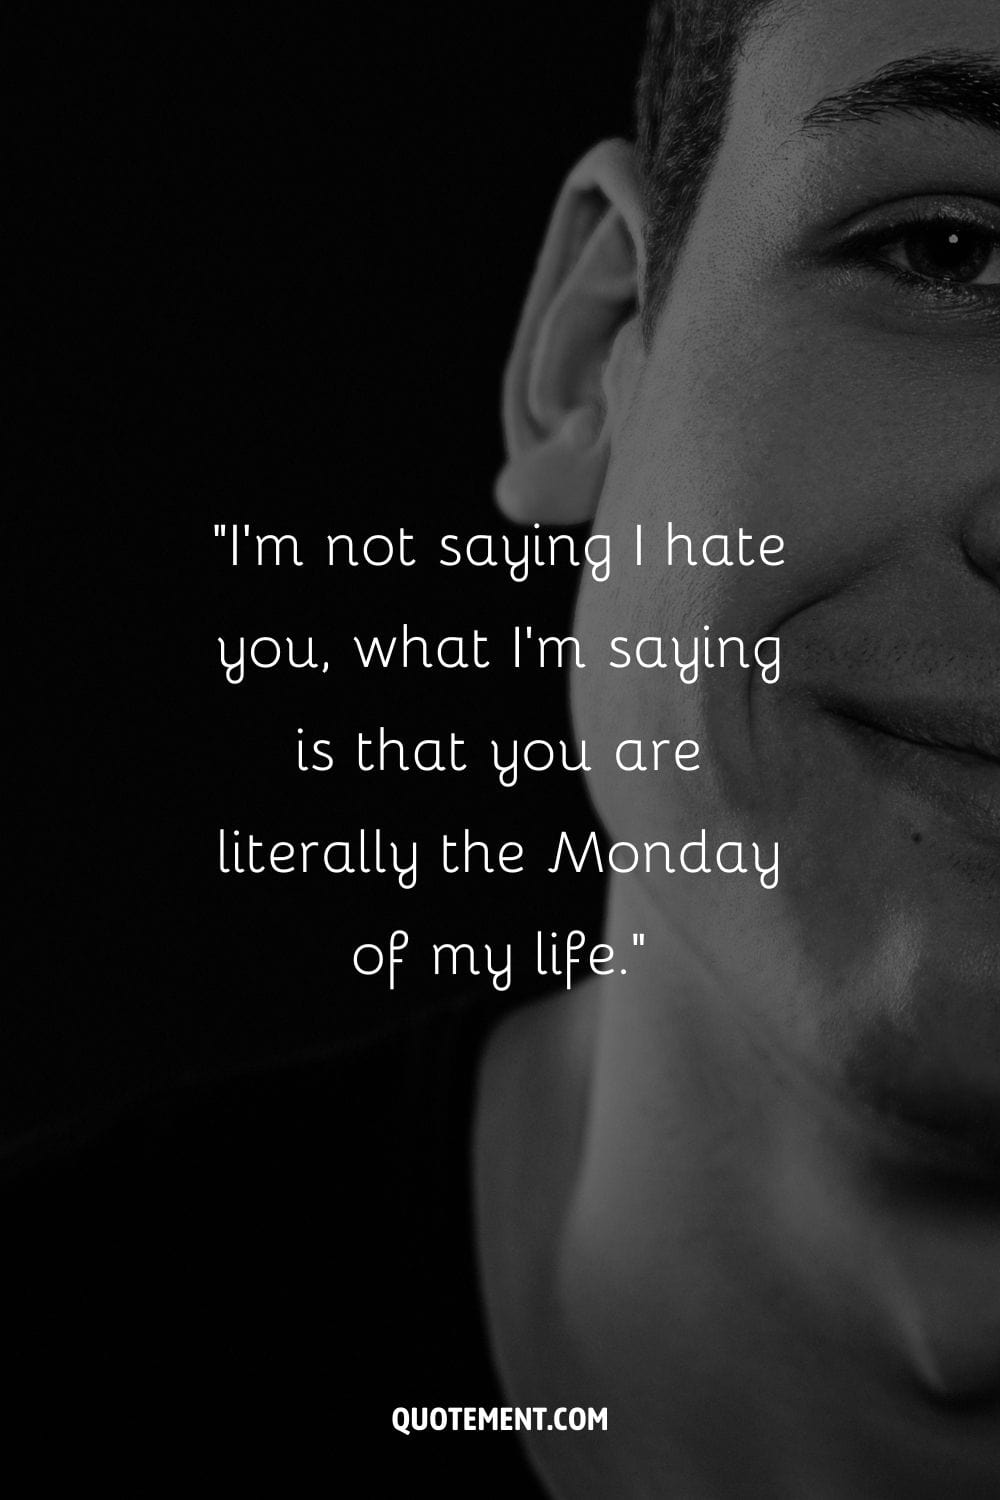 “I’m not saying I hate you, what I’m saying is that you are literally the Monday of my life.” ― Unknown